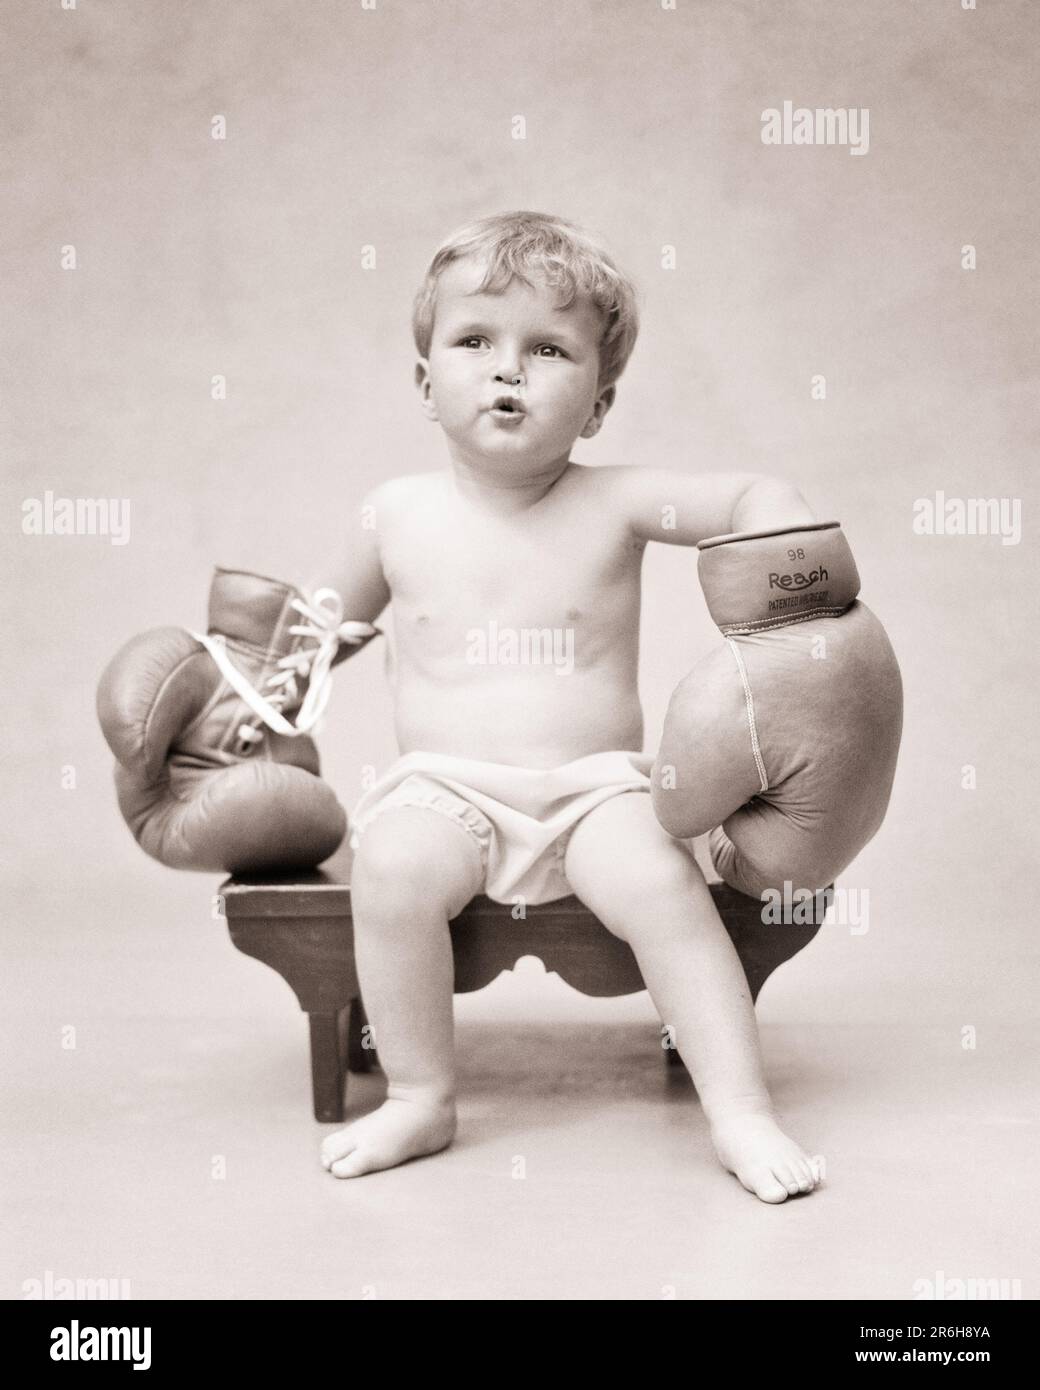 1930s CUTE CHARMING BLONDE TODDLER BOY WEARING UNDER PANTS AND TOO BIG ADULT SIZED BOXING GLOVES SITTING ON A BENCH - b10413 HAR001 HARS ATHLETE LIFESTYLE TOO WINNING STUDIO SHOT HOME LIFE COPY SPACE FULL-LENGTH CHARACTER MALES ATHLETIC B&W EYE CONTACT HUMOROUS FIGHTER ADVENTURE AND COMICAL OCCUPATIONS CONCEPTUAL COMEDY BABY ACTORS BABY BOY PLEASANT AGREEABLE CHARMING JUVENILES LOVABLE PLEASING ADORABLE APPEALING BLACK AND WHITE CAUCASIAN ETHNICITY HAR001 OLD FASHIONED TOO BIG Stock Photo